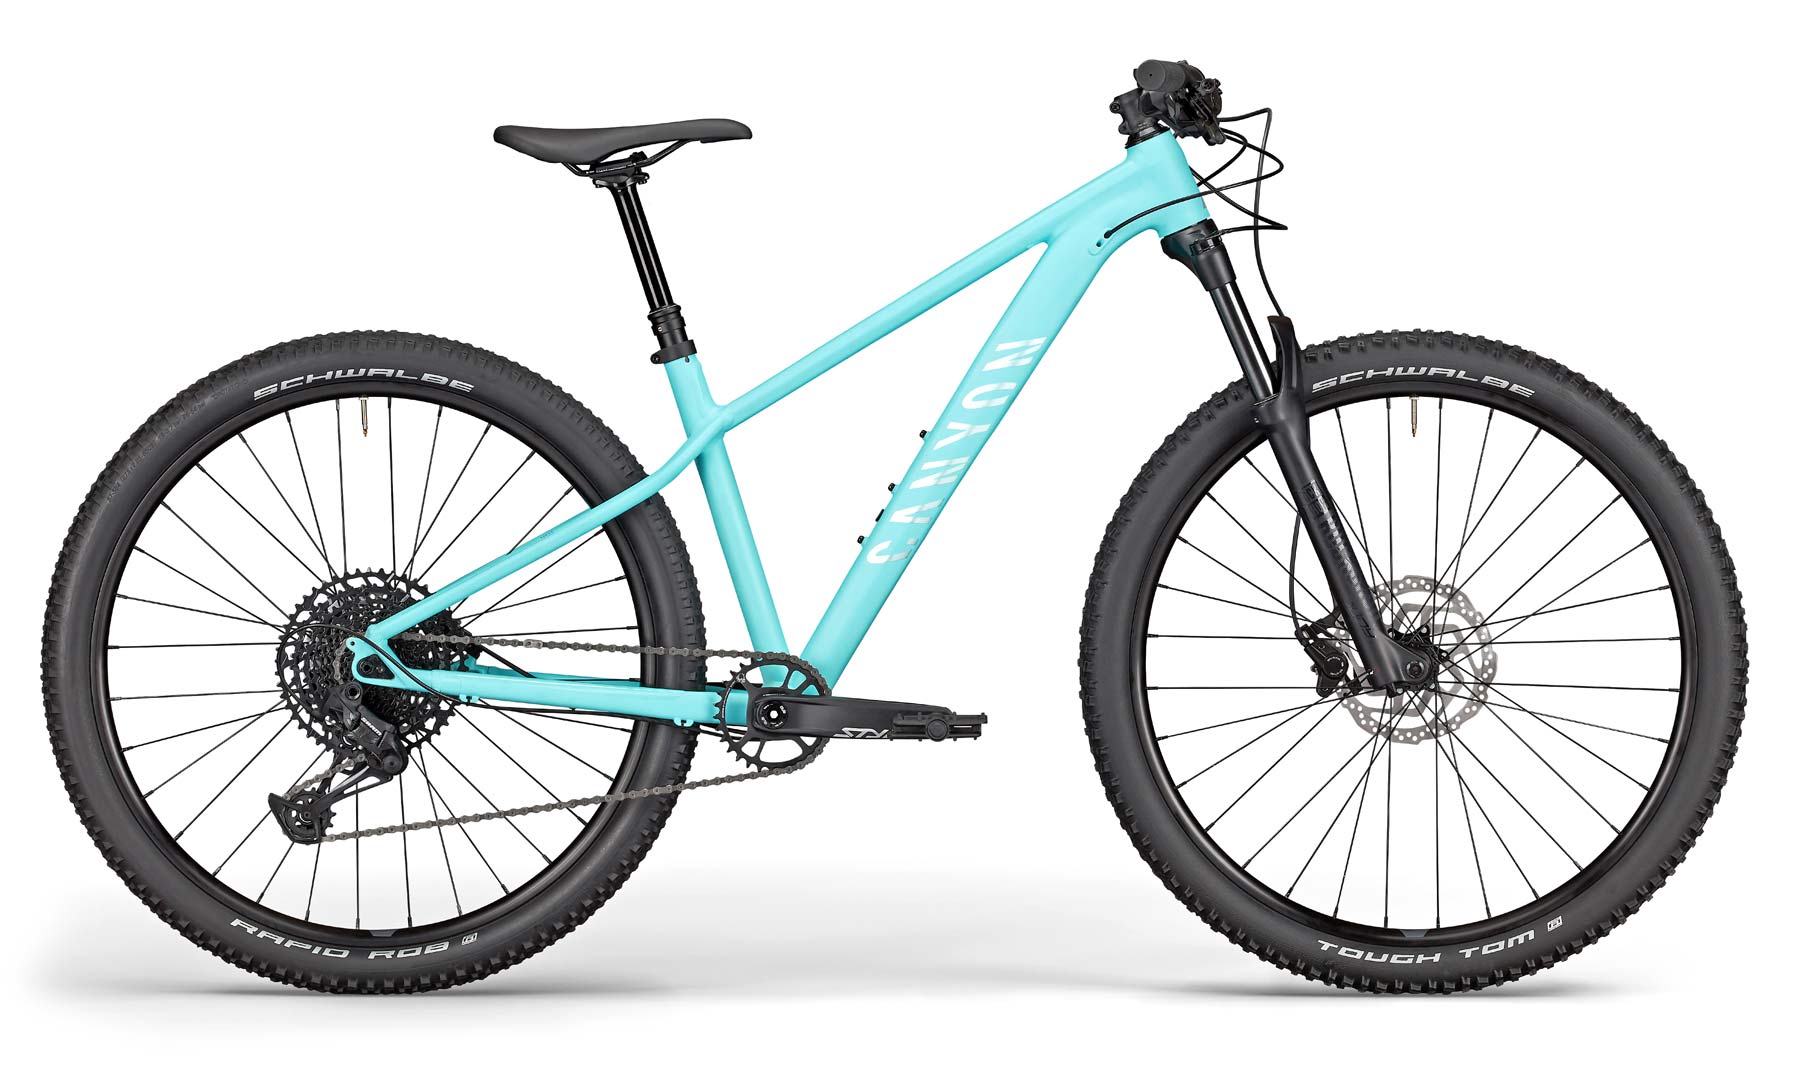 2021 Canyon Grand Canyon alloy MTB hardtail, updated affordable aluminum mountain bike trail hardtails